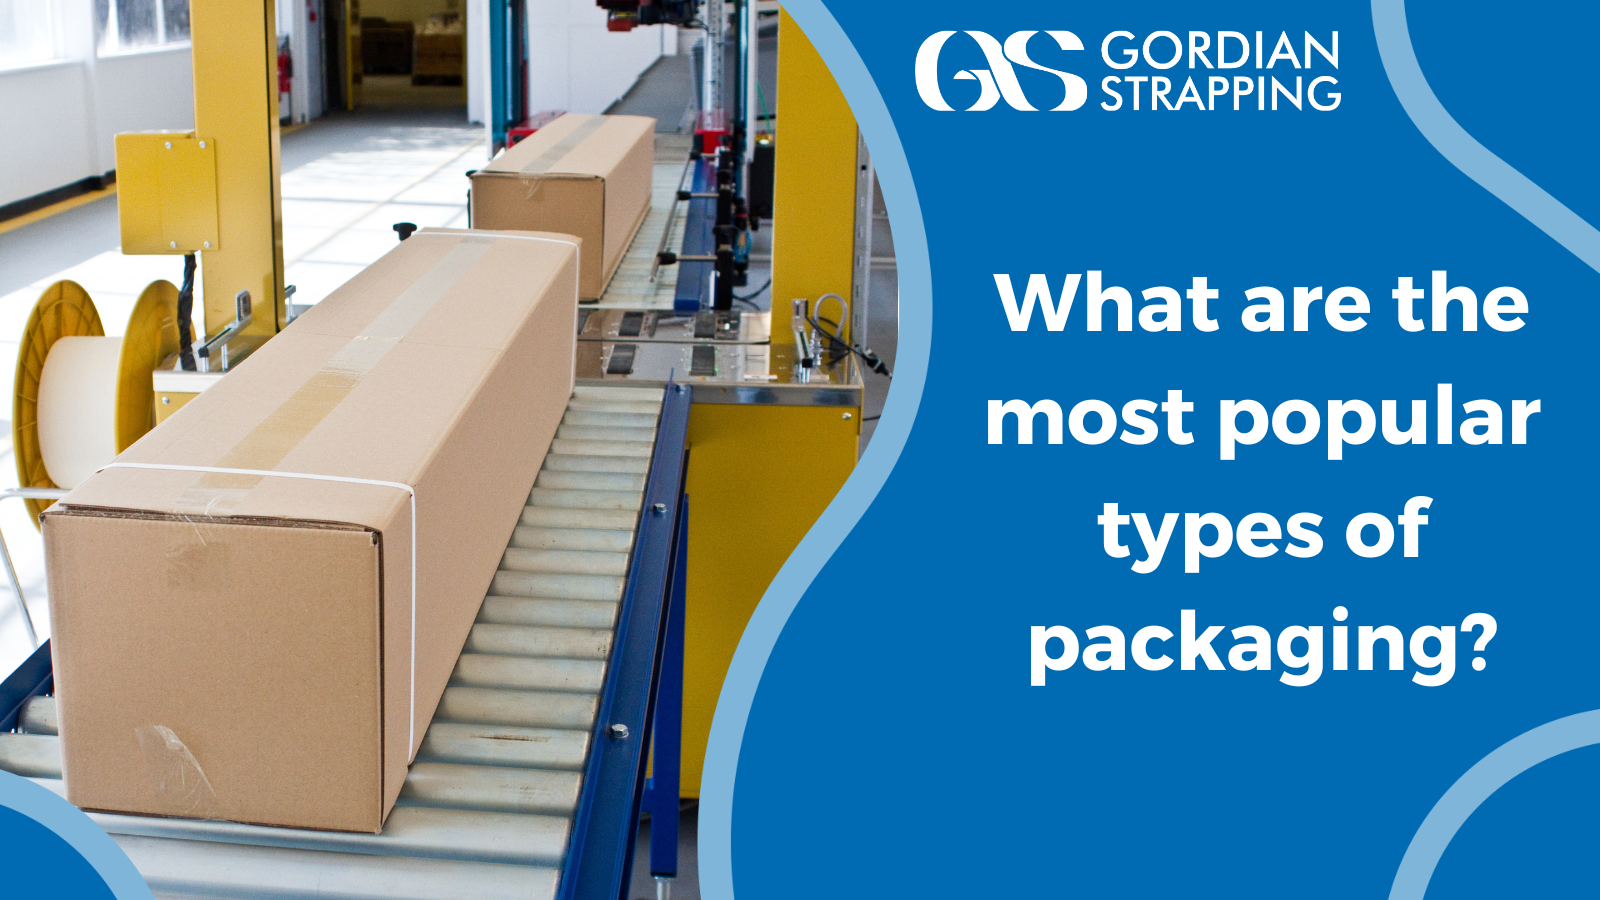 What are the most popular types of packaging?